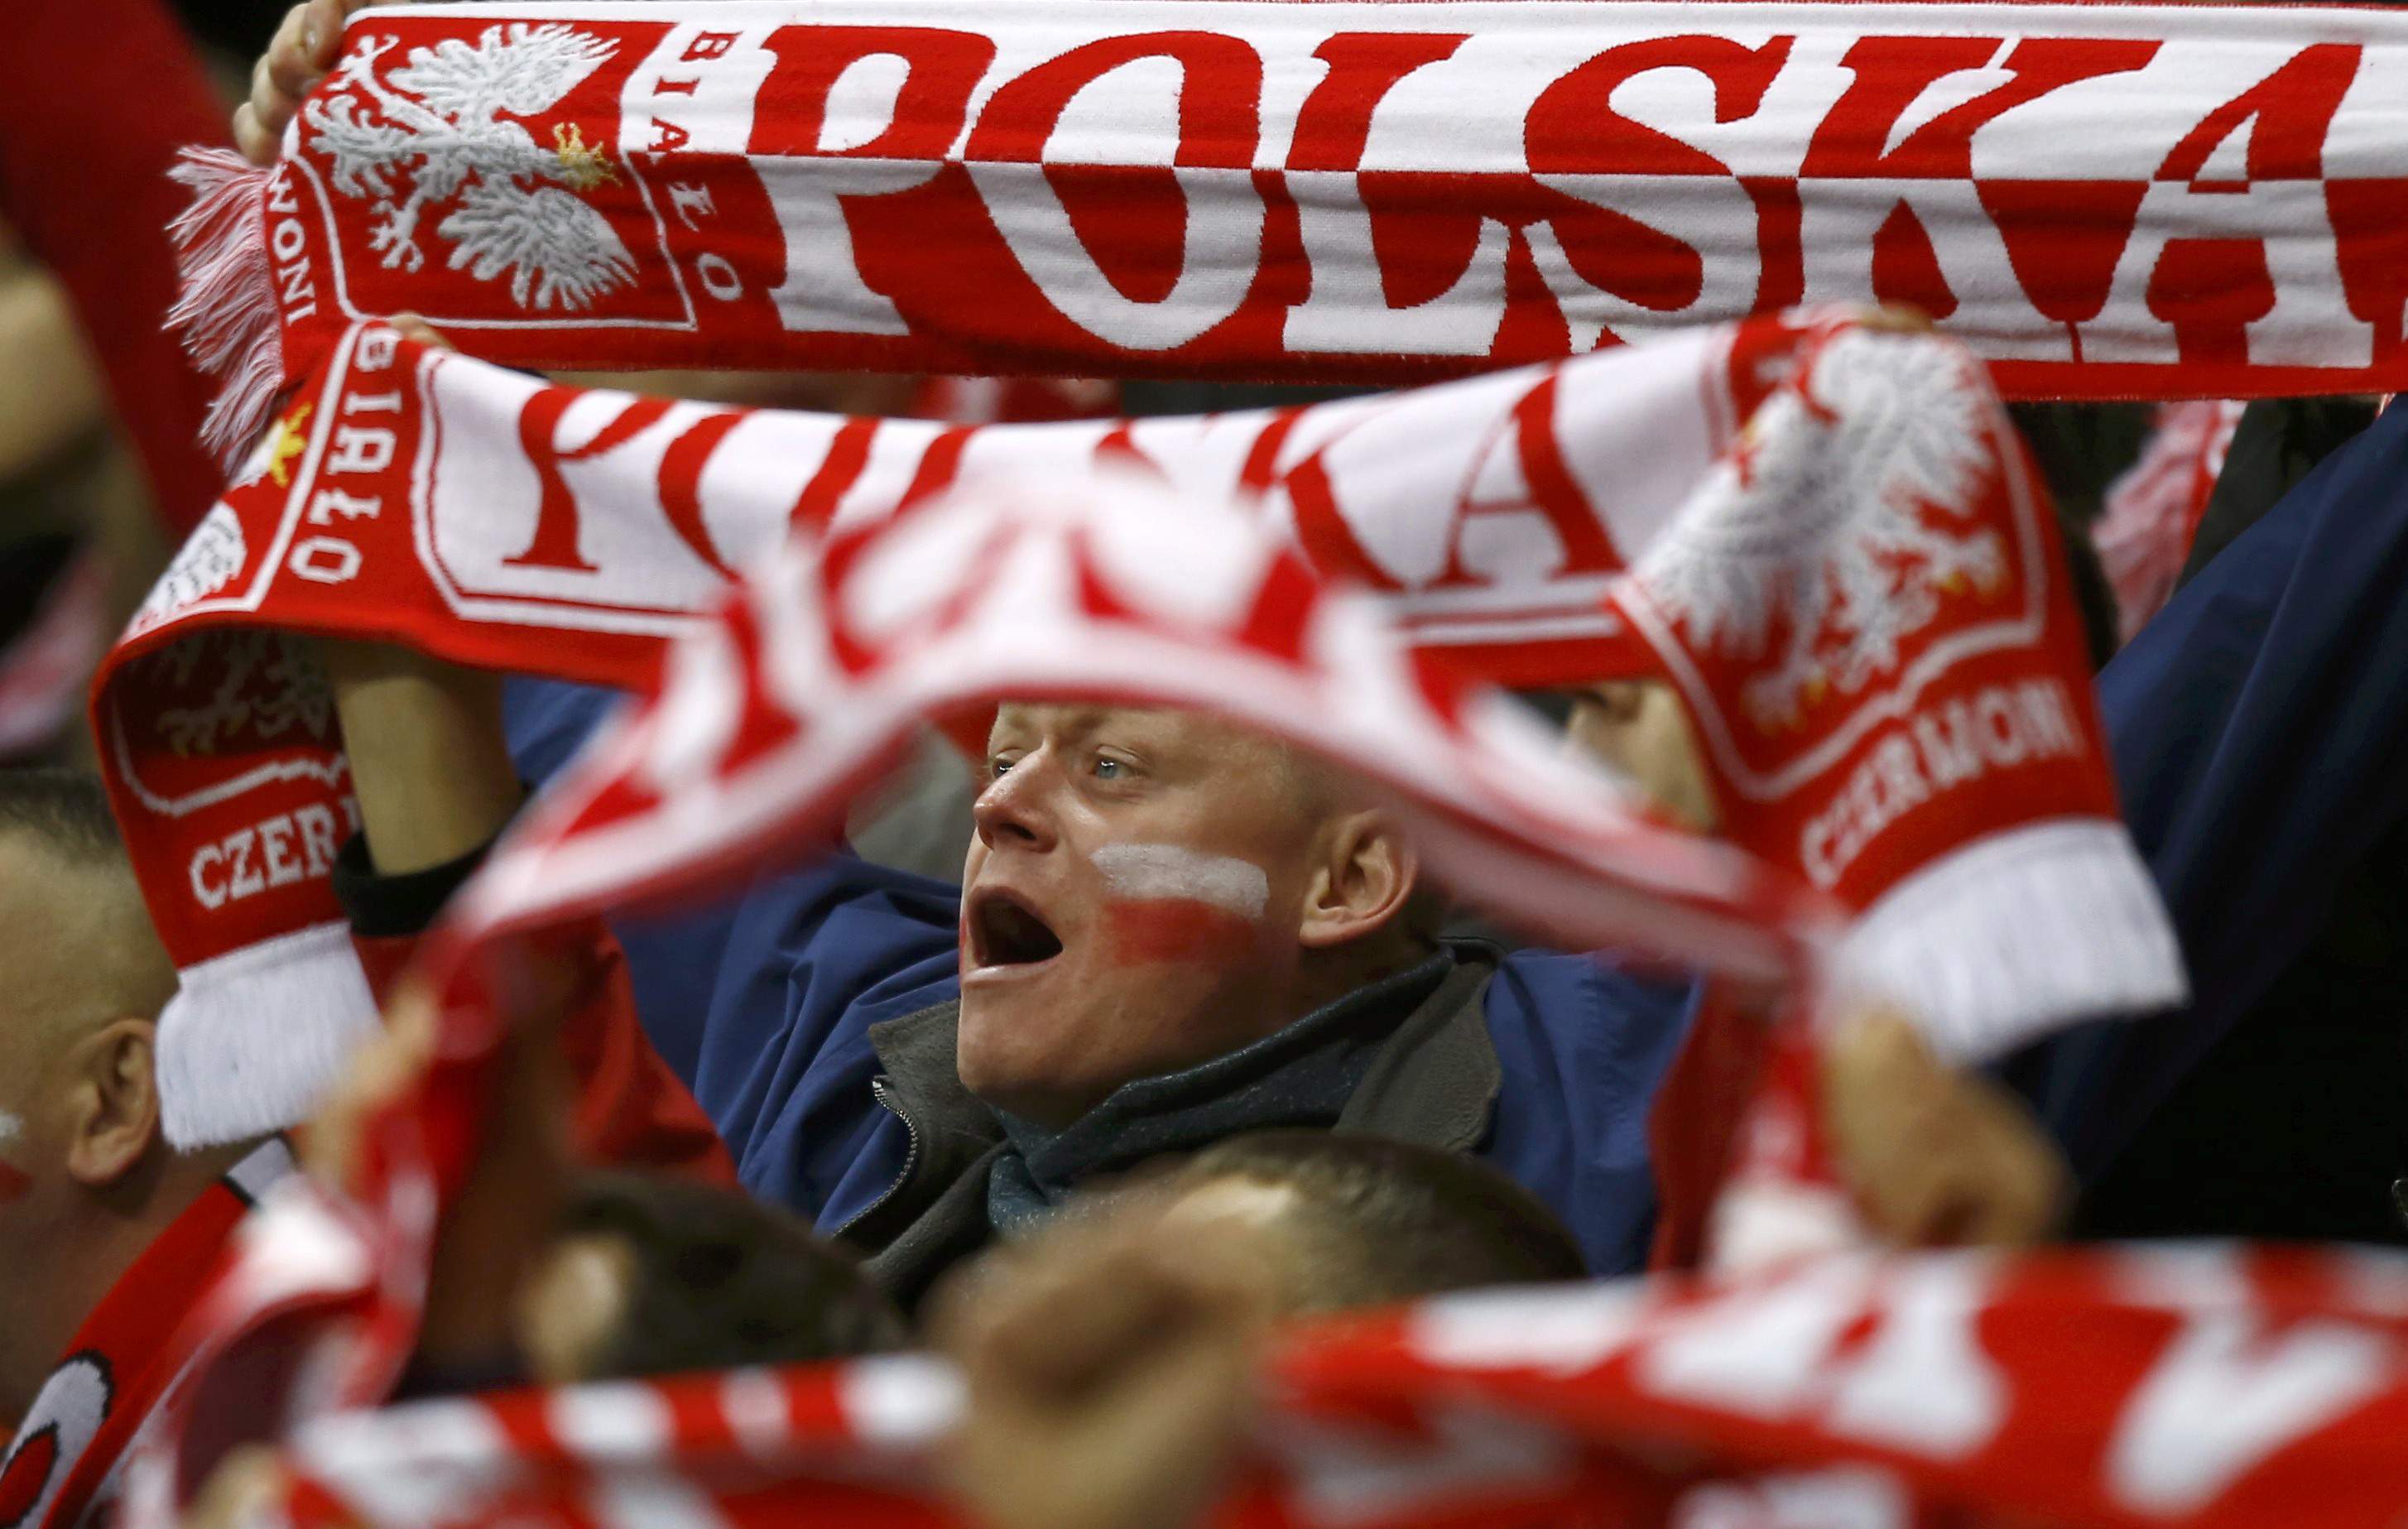 Poland supporters cheer during the Euro 2016 group D qualification soccer match against Republic of Ireland in Warsaw, Poland October 11, 2015. REUTERS/Kacper Pempel